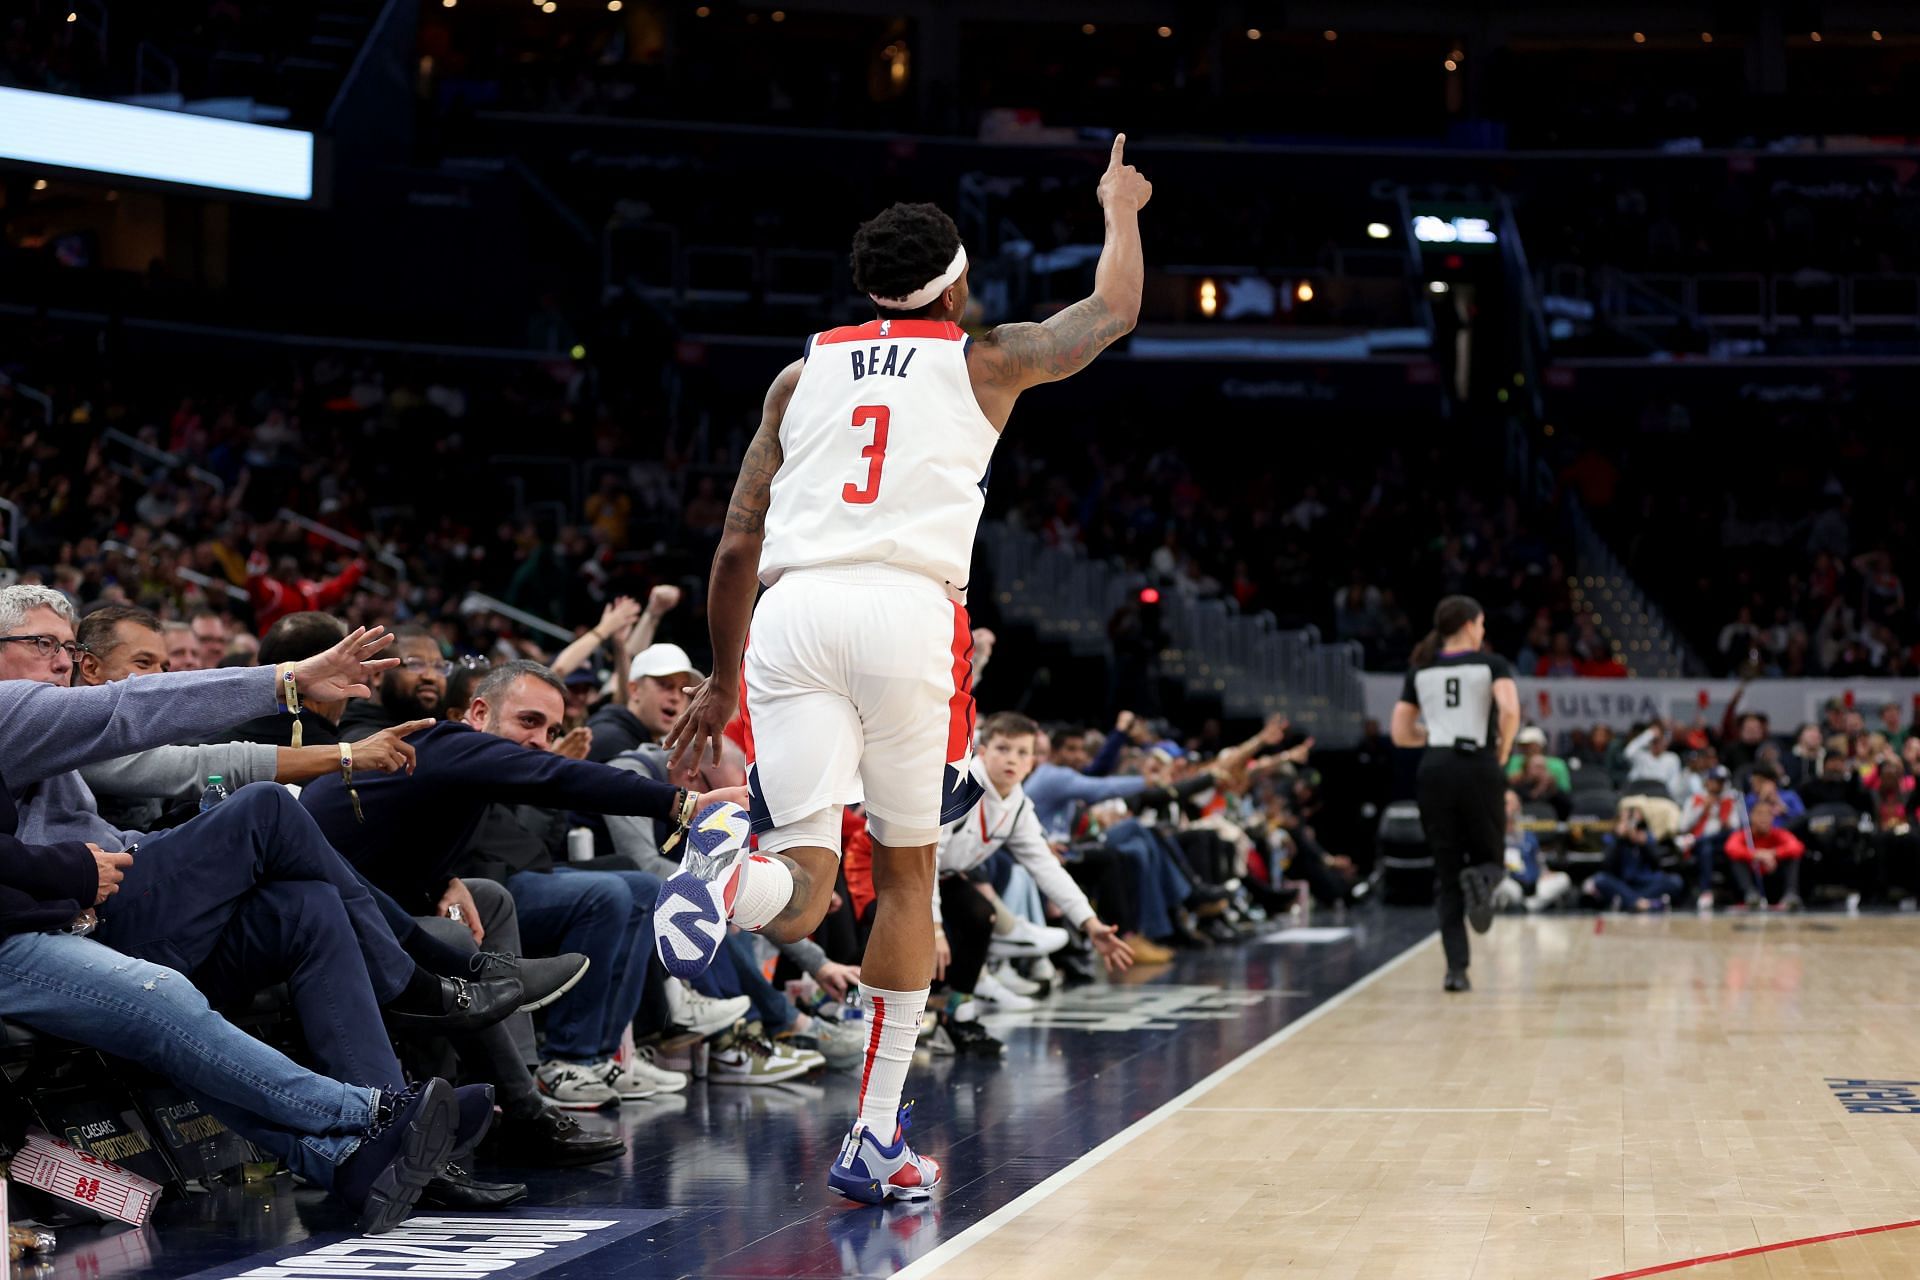 Beal has been red-hot in the clutch (Image via Getty Images)